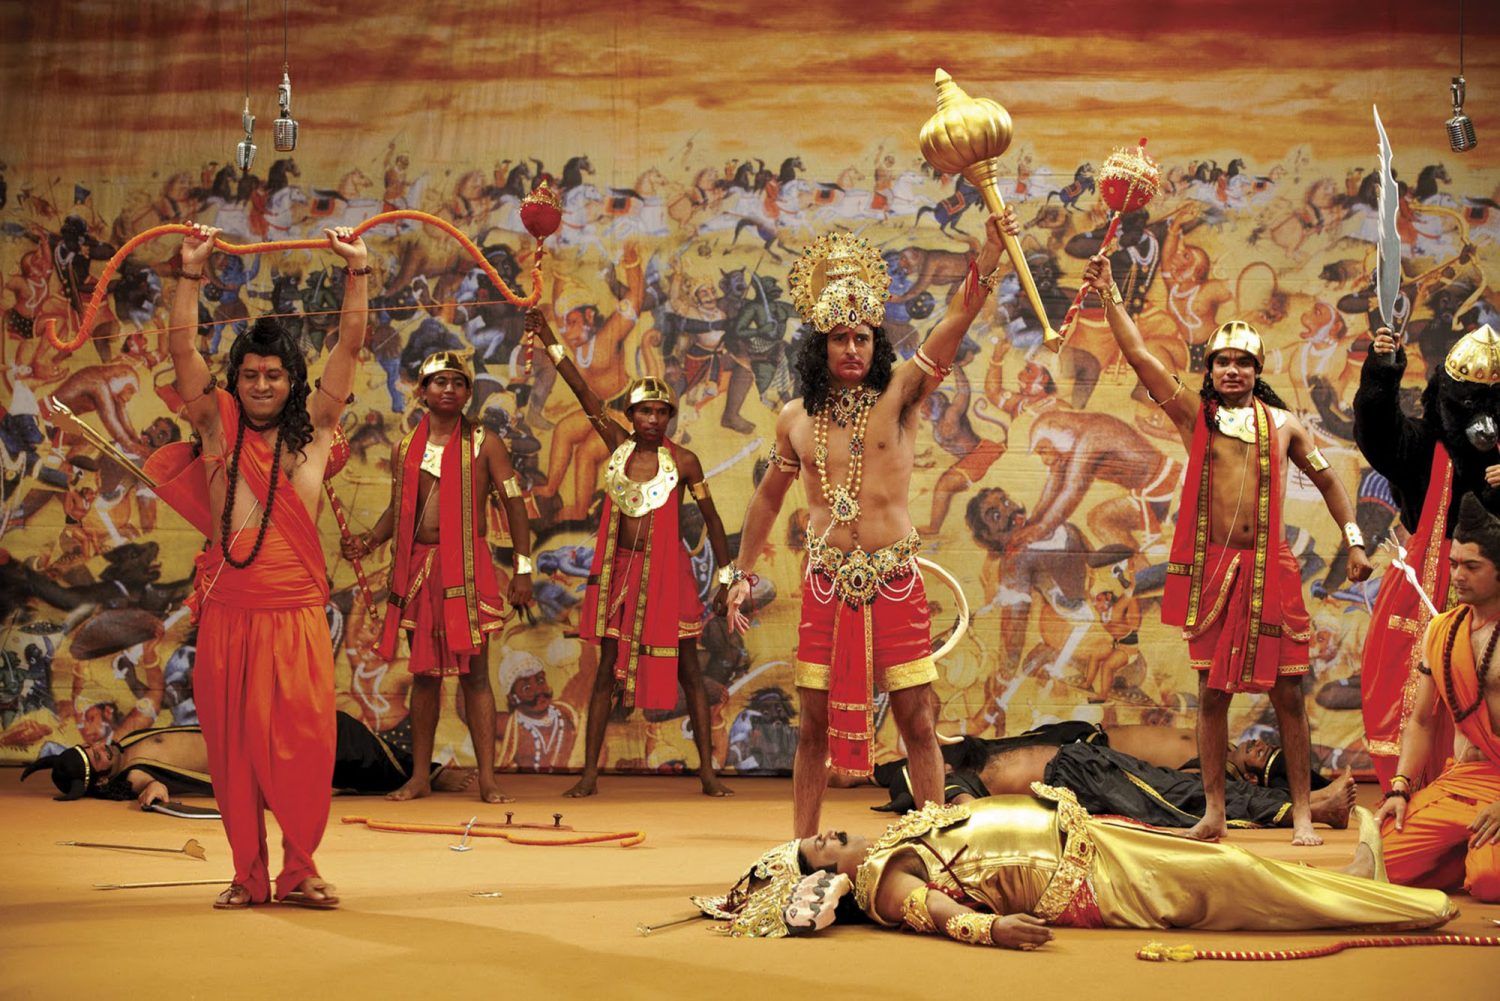 A depiction of Ramlila in India